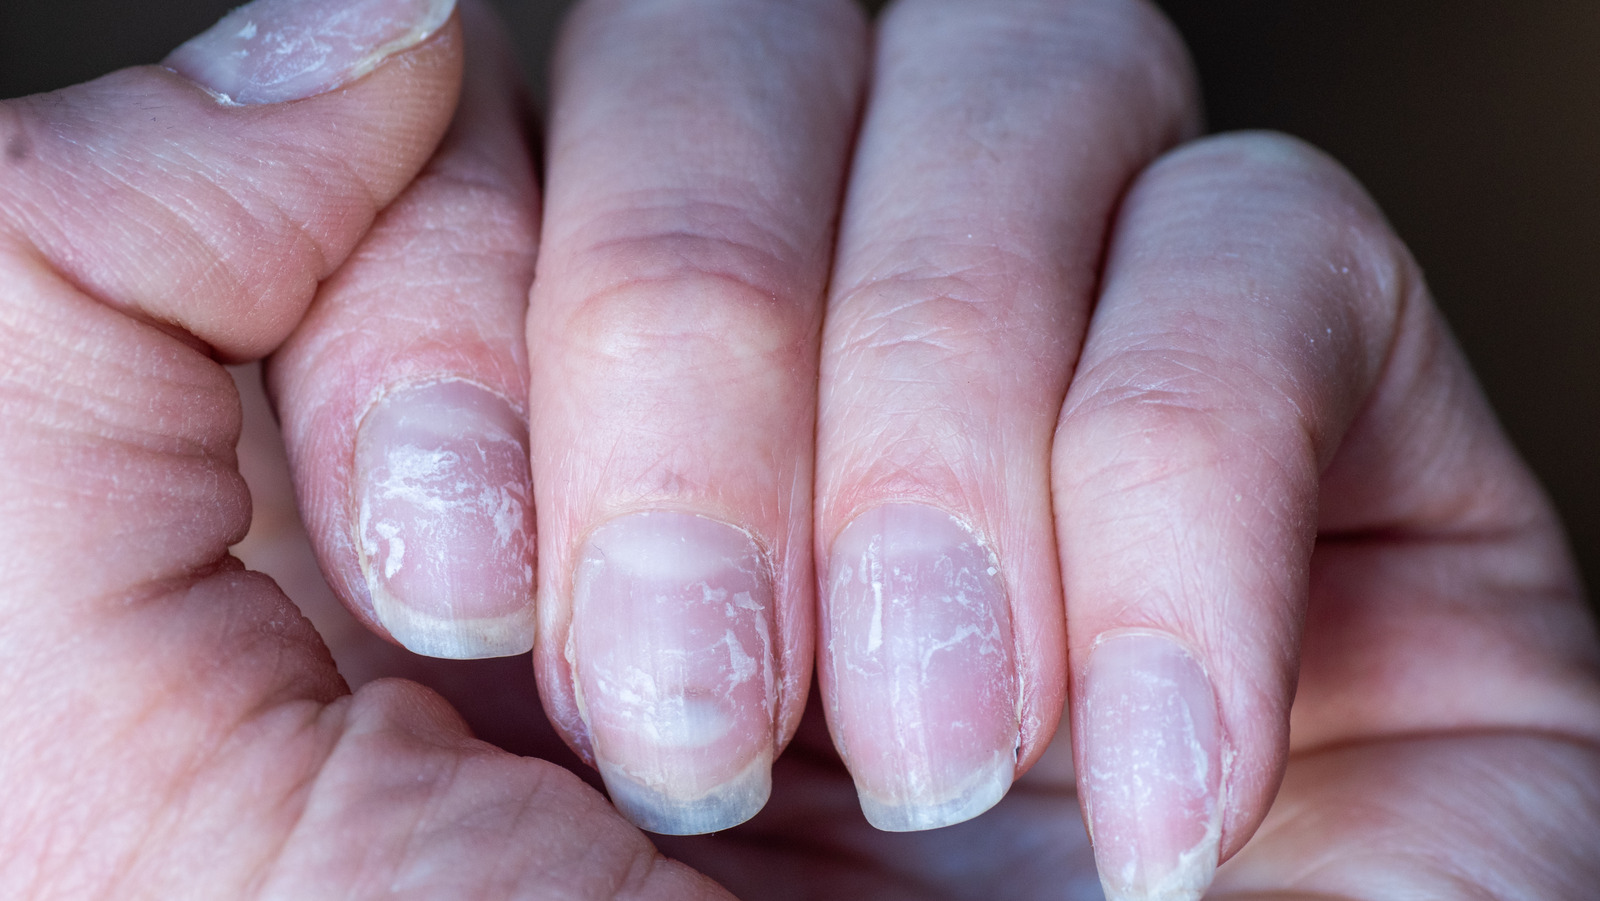 If You're Nails Are Peeling, Here's How You Should Treat Them